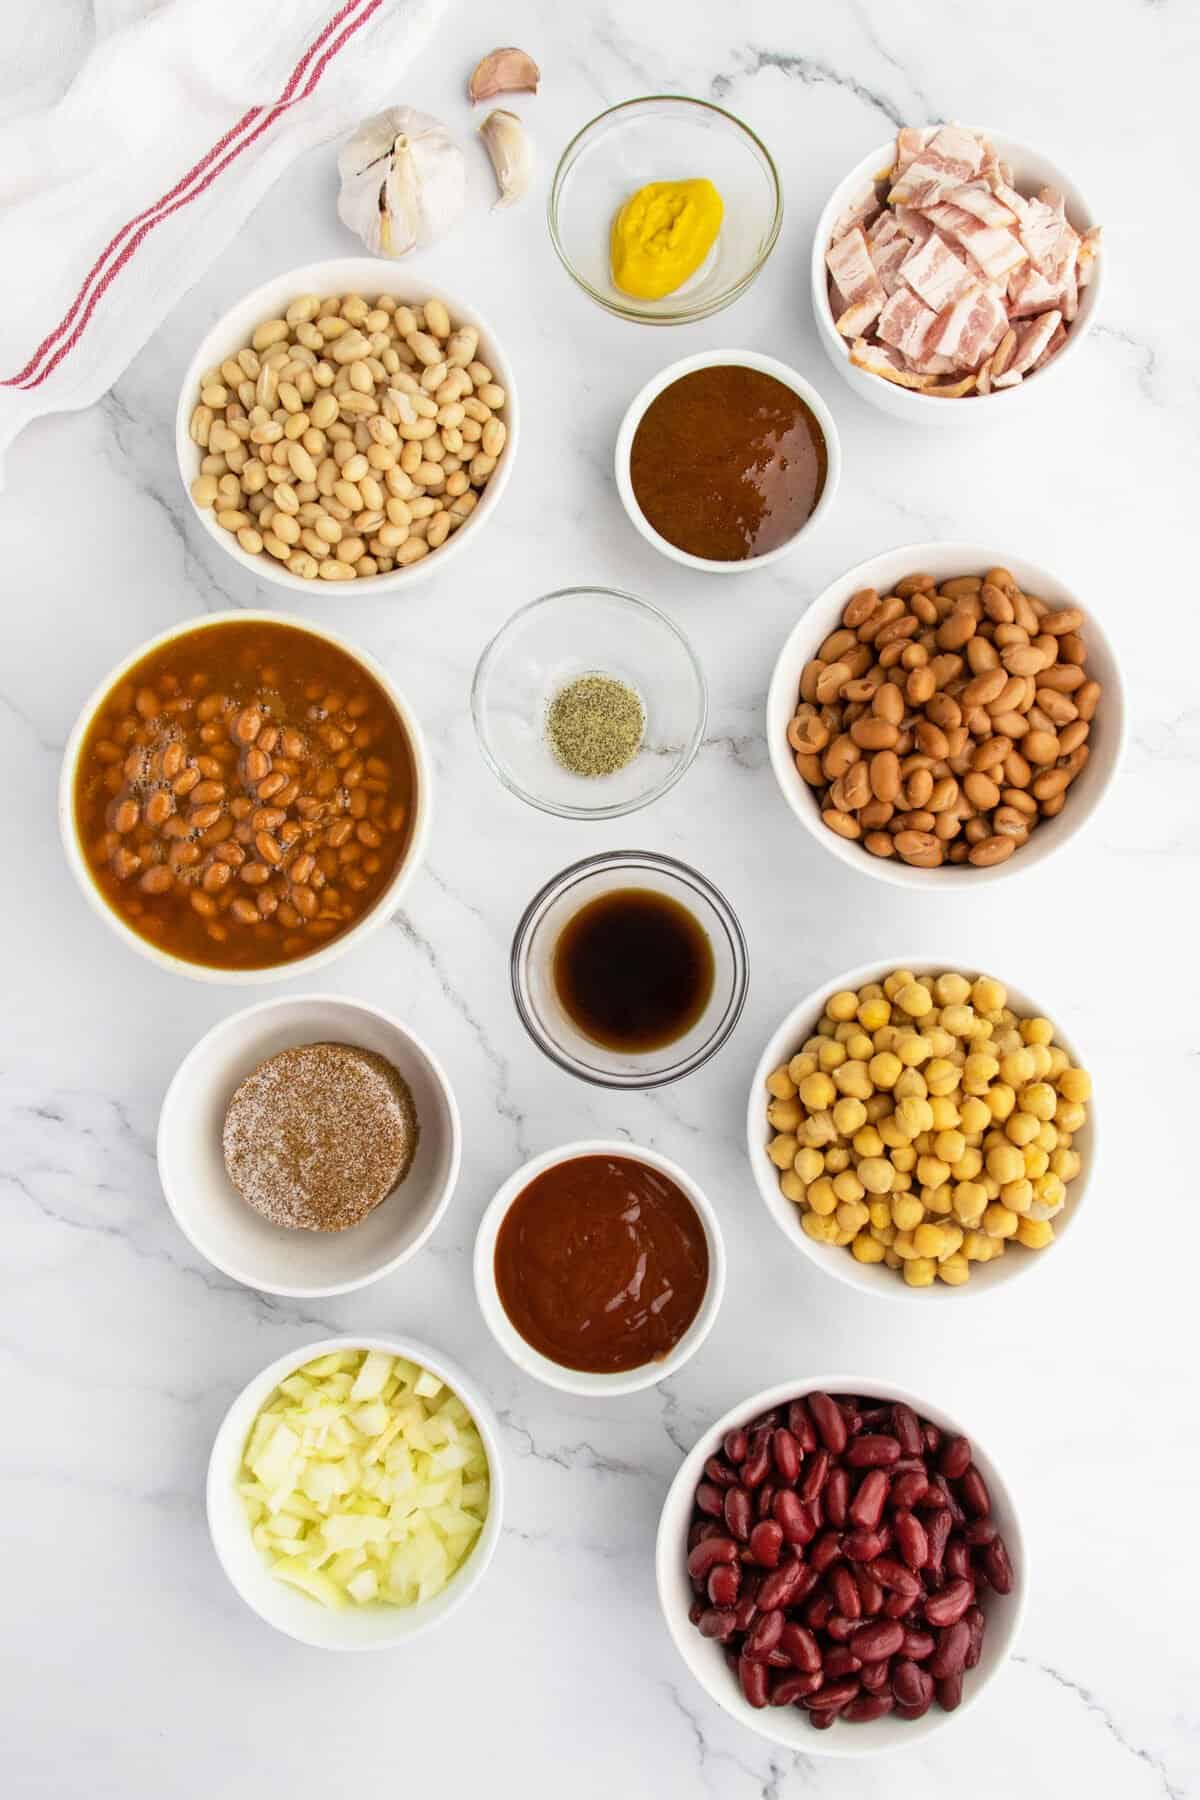 Homemade baked beans ingredients